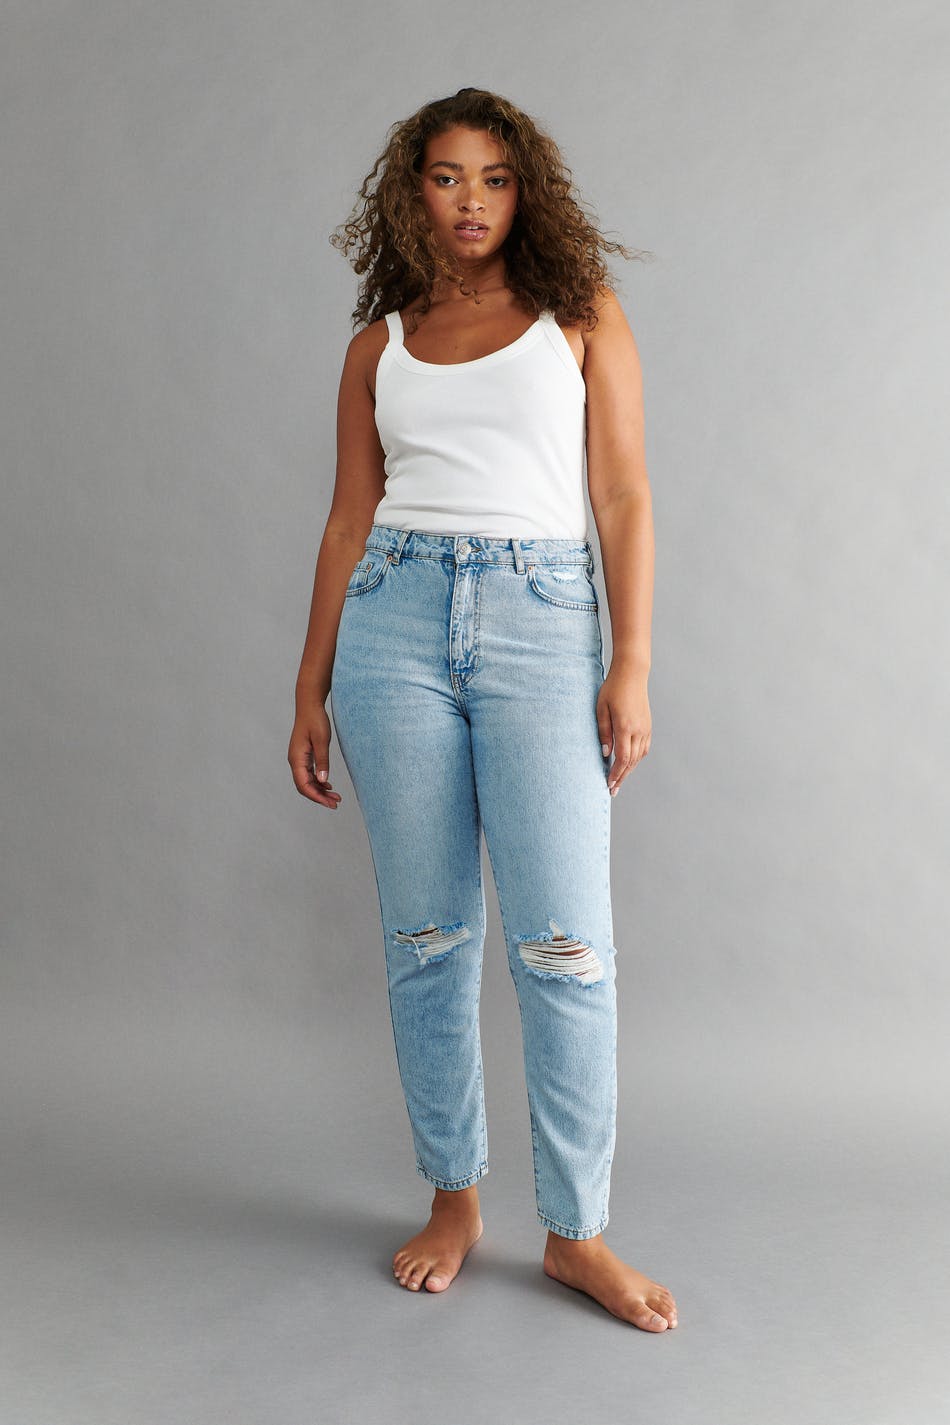 mom jeans - Gina Tricot